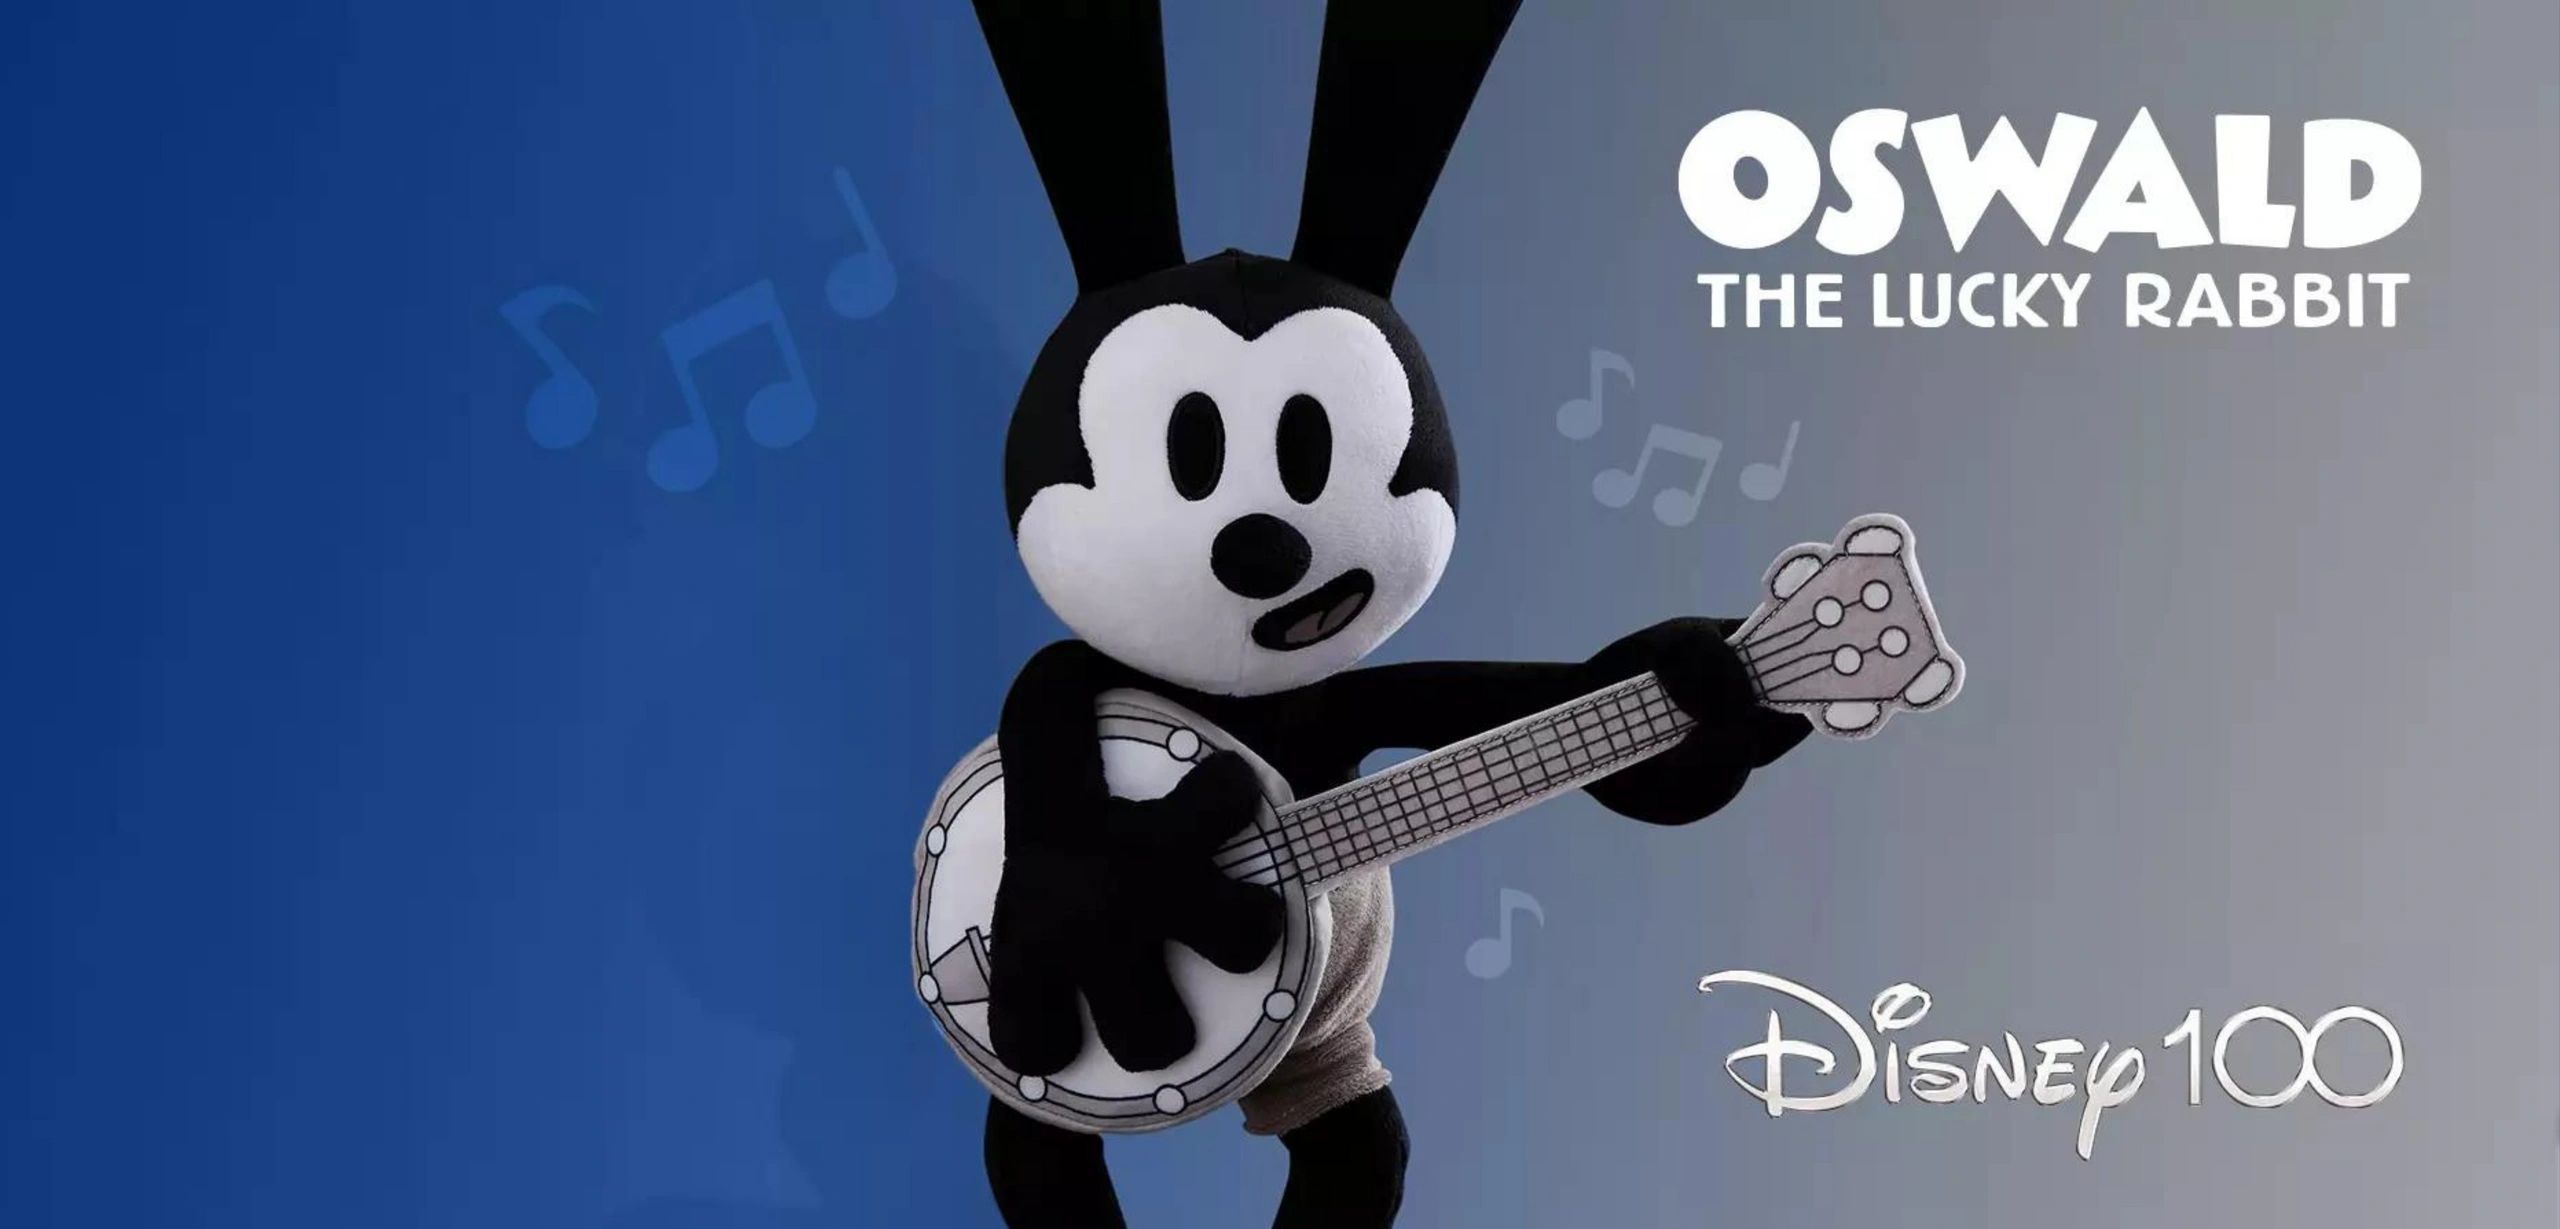 Oswald The Lucky Rabbit Disney 100 Collection on Shop Disney now!